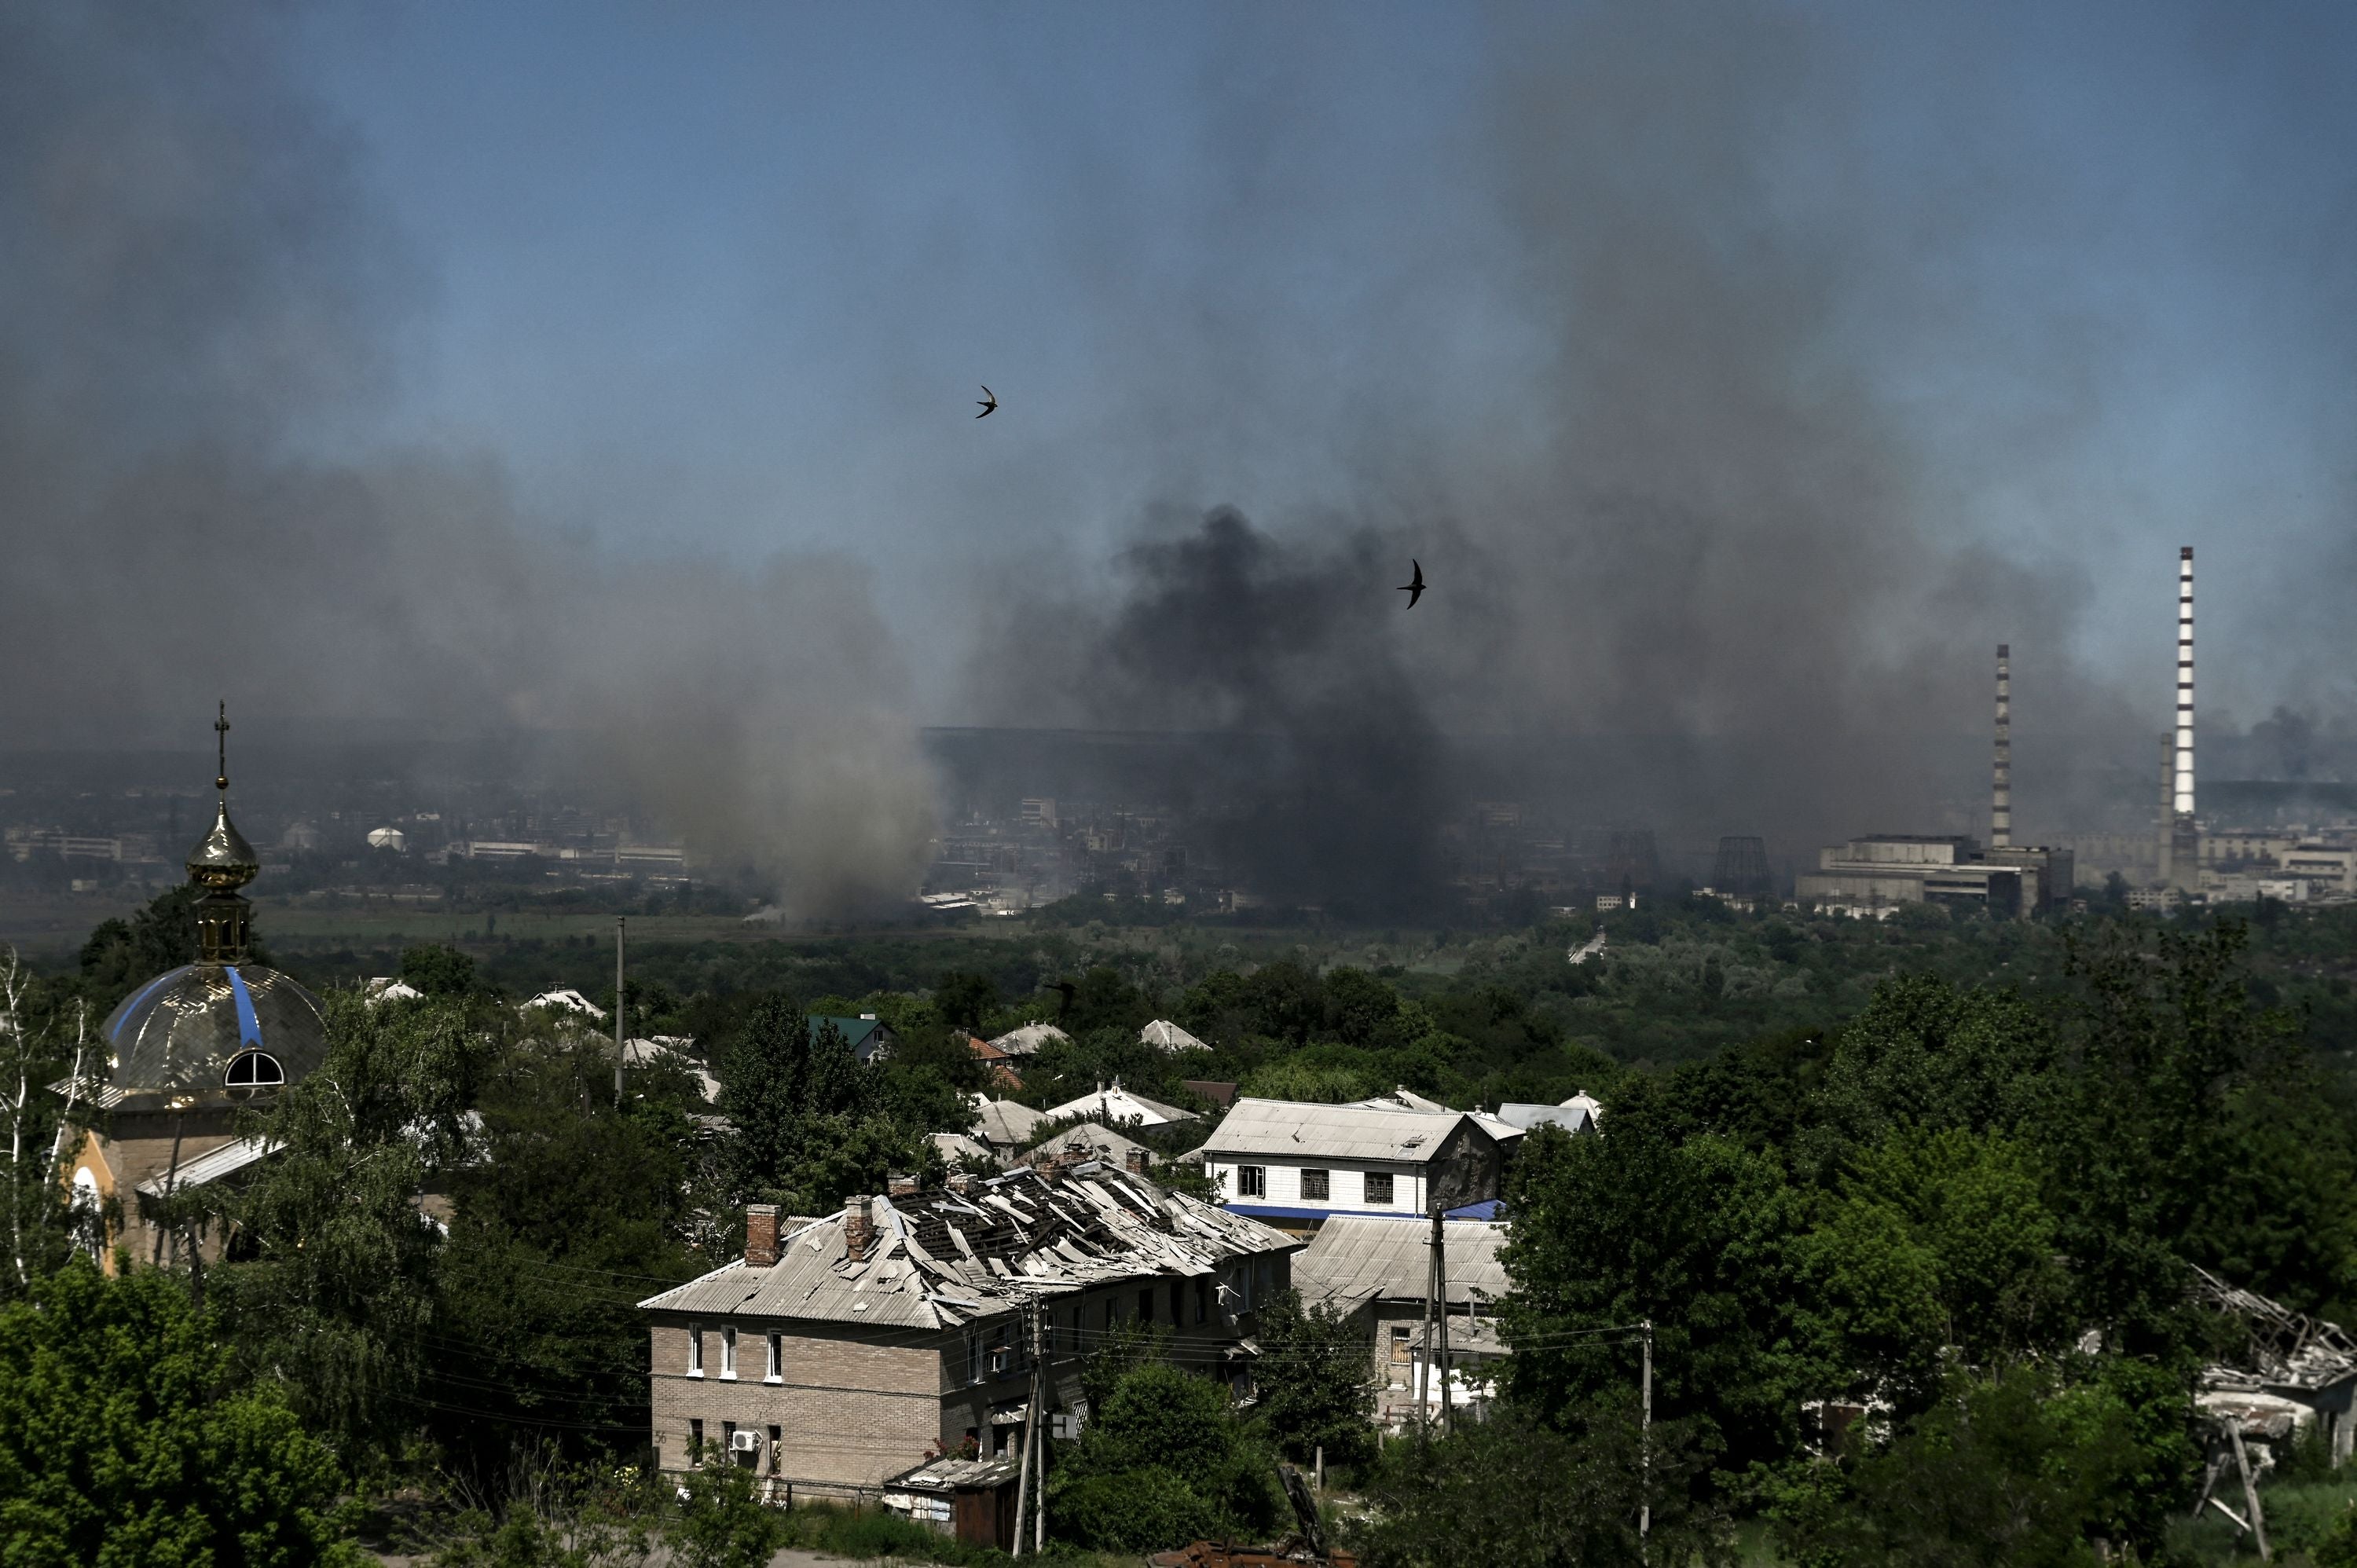 Black smoke and dirt rise from Sievierodonetsk during a battle between Russian and Ukrainian troops